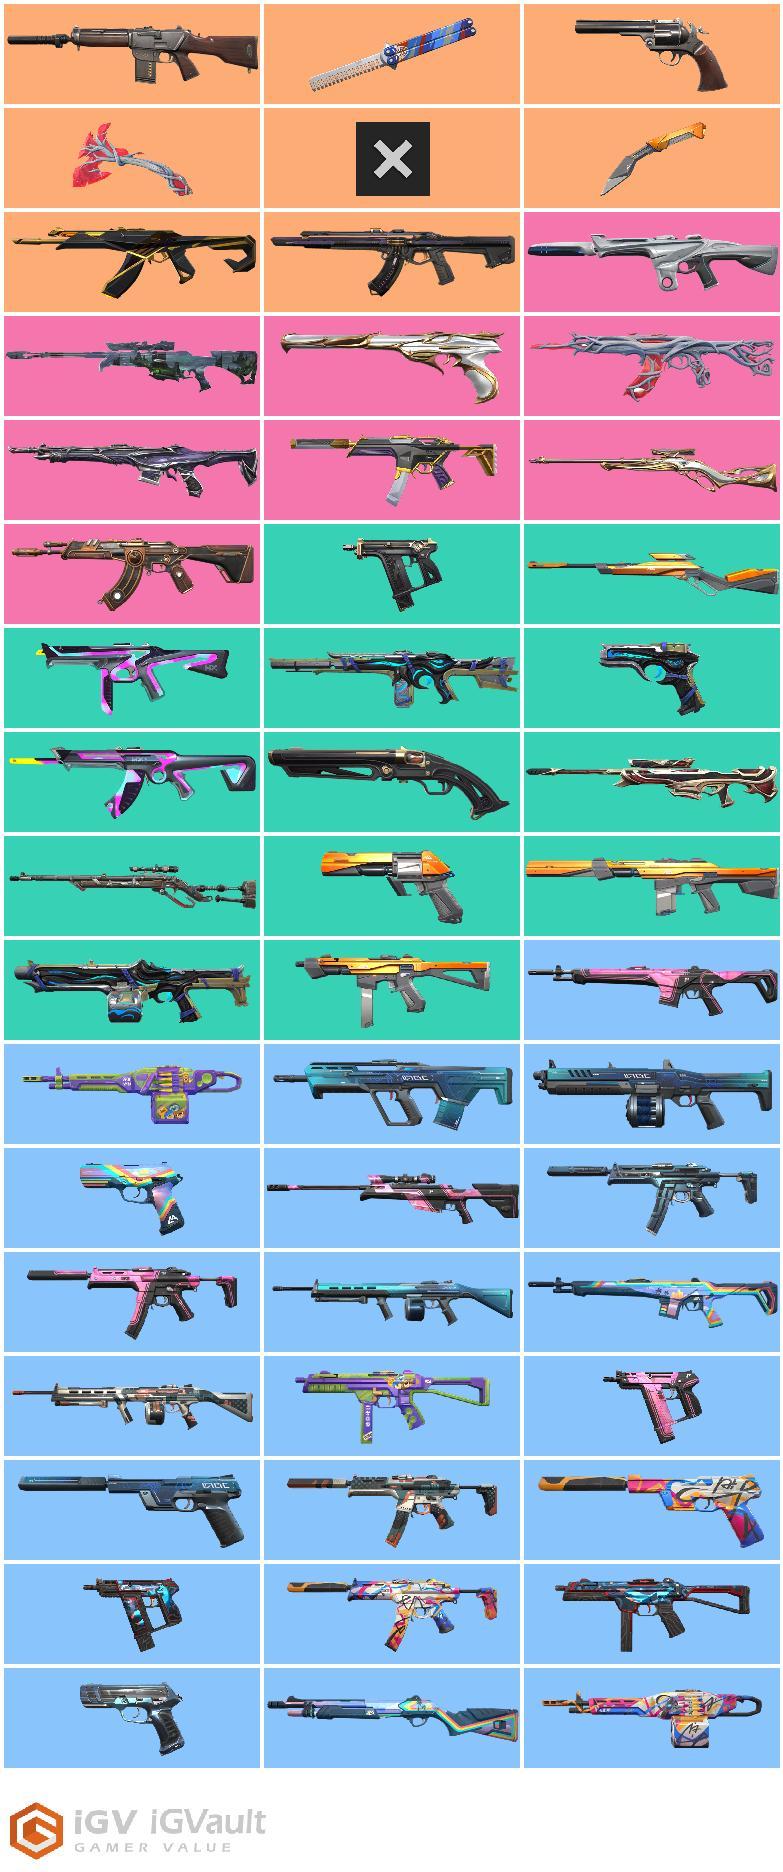 Eropa / 51 SKINS / Neo Frontier Phantom+Chaos Vandal + 4 RARE KNIVES (Gaia's Wrath) / MAIL (FULL ACCESS) / LUX Quality